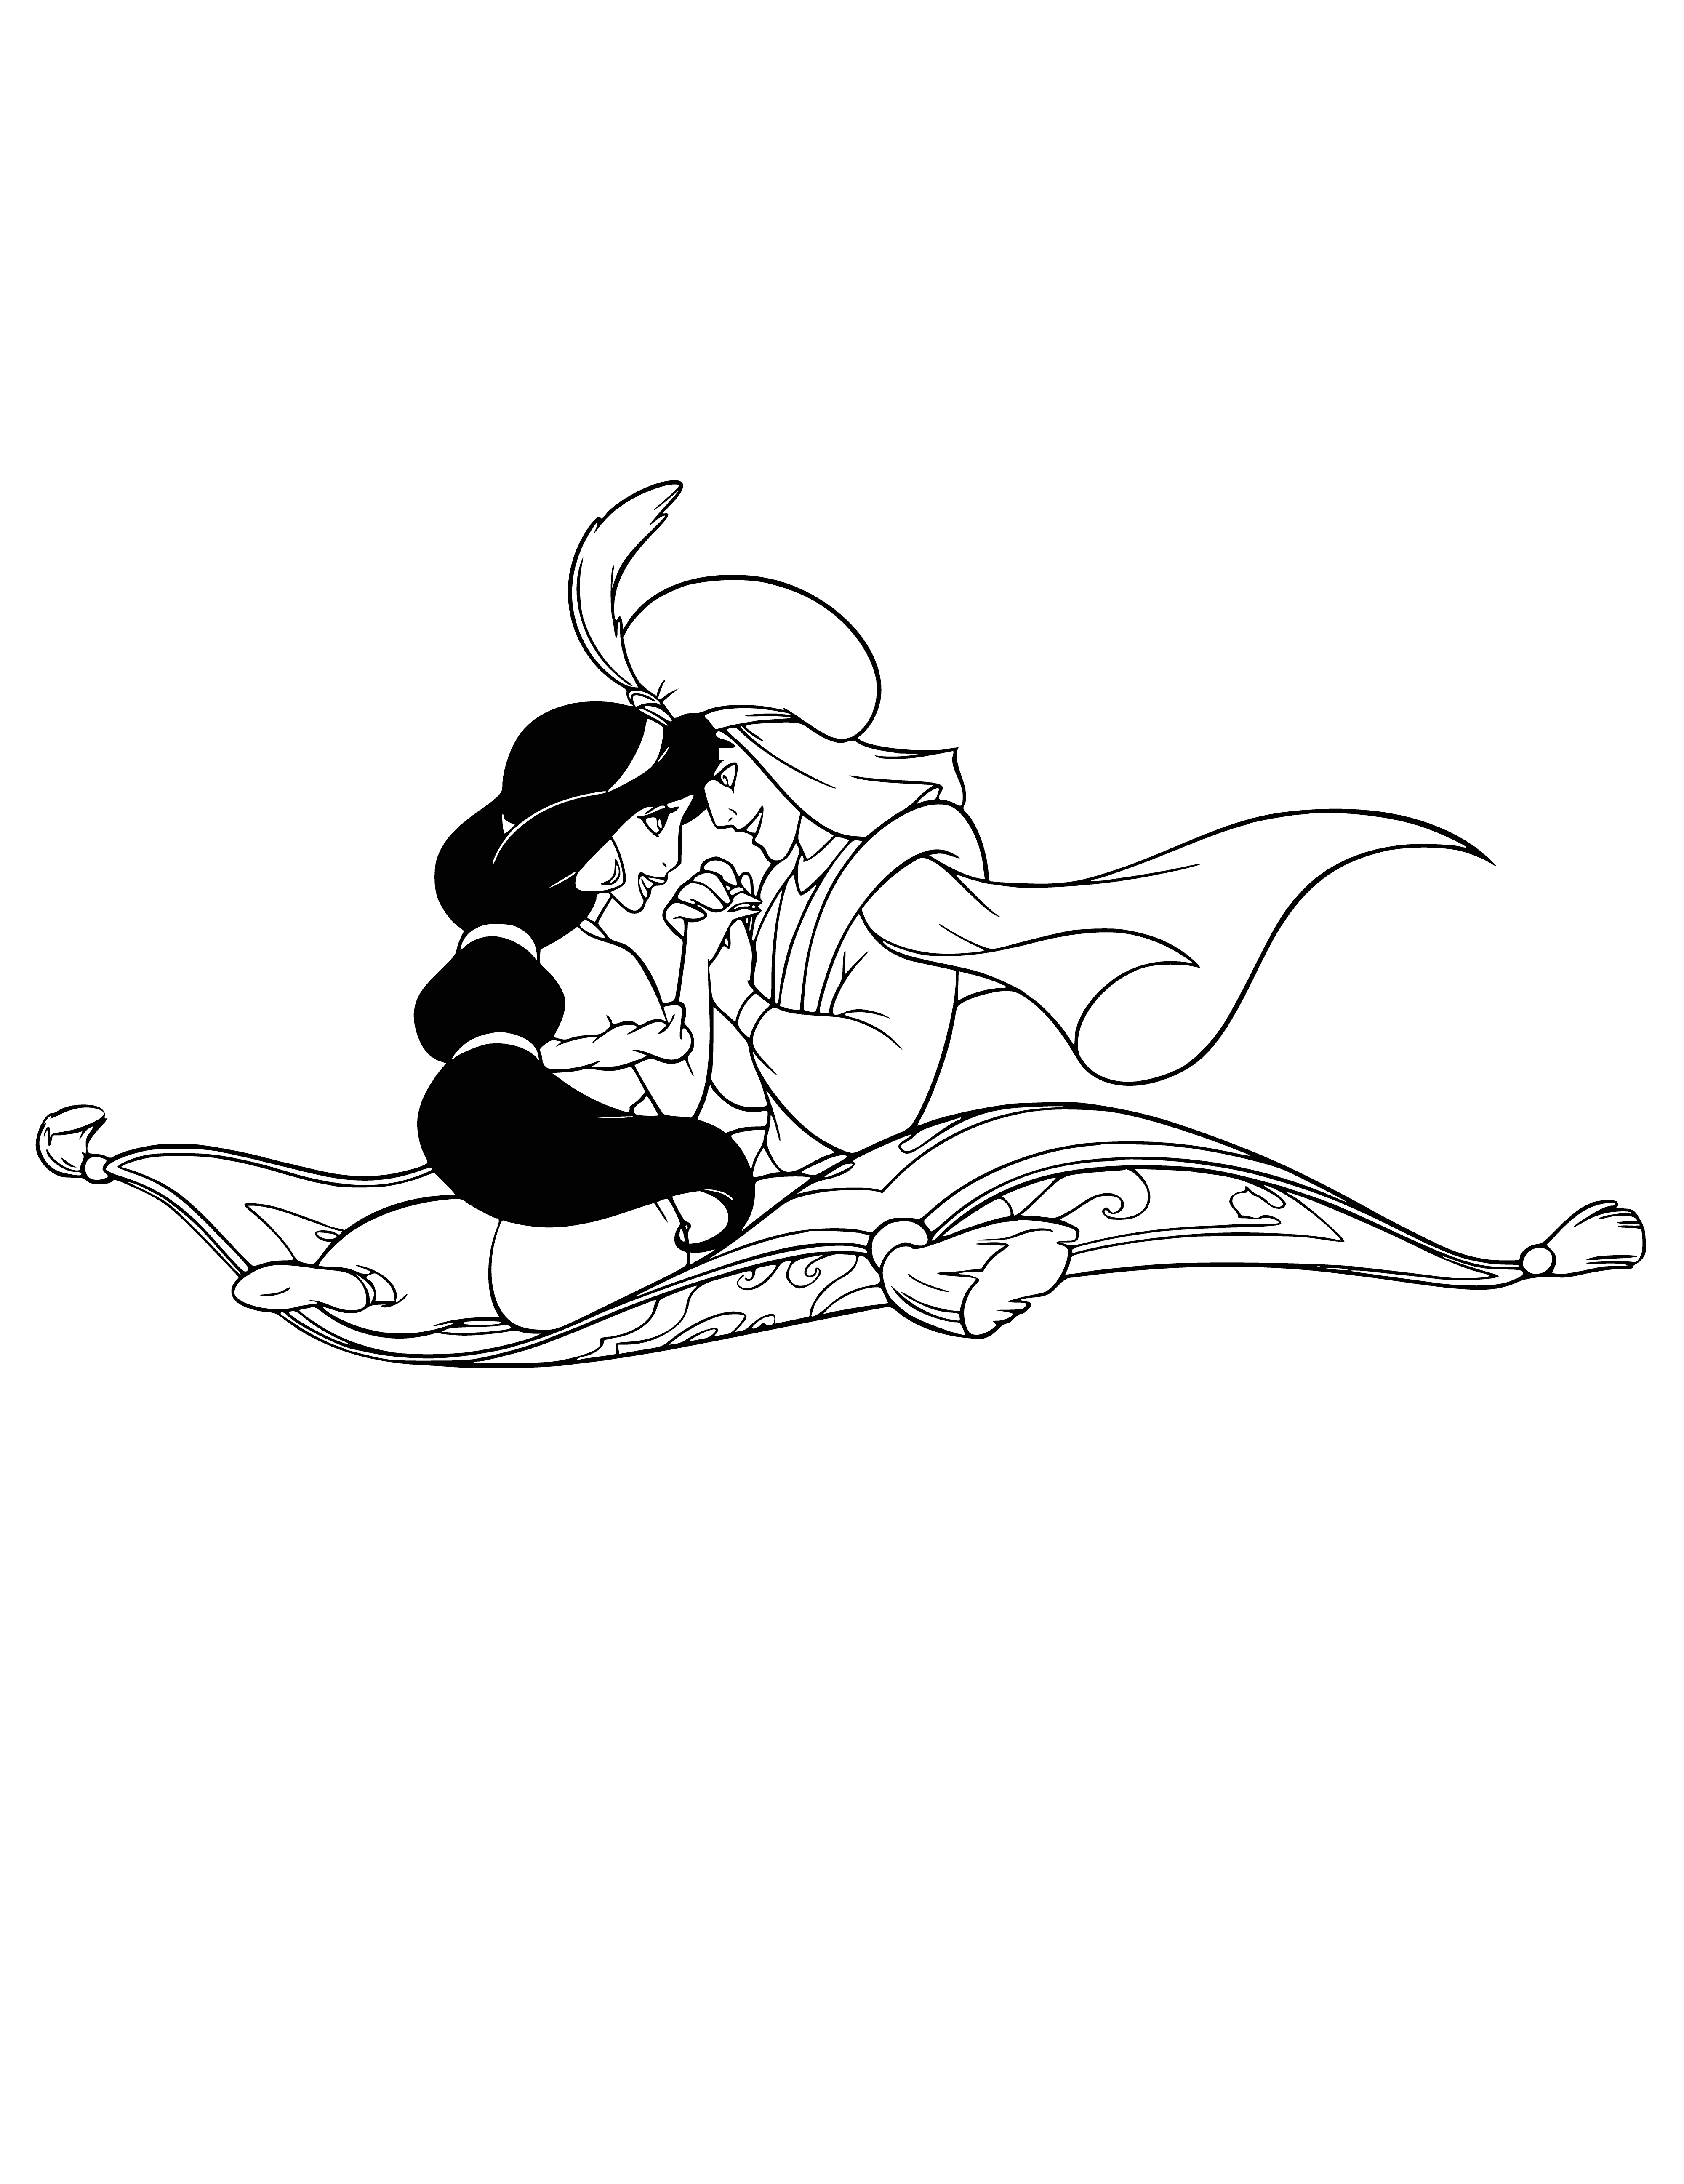 coloring page: Aladdin & Jasmine on a flying carpet, him holding onto the edge, her holding onto him, enjoying the ride.